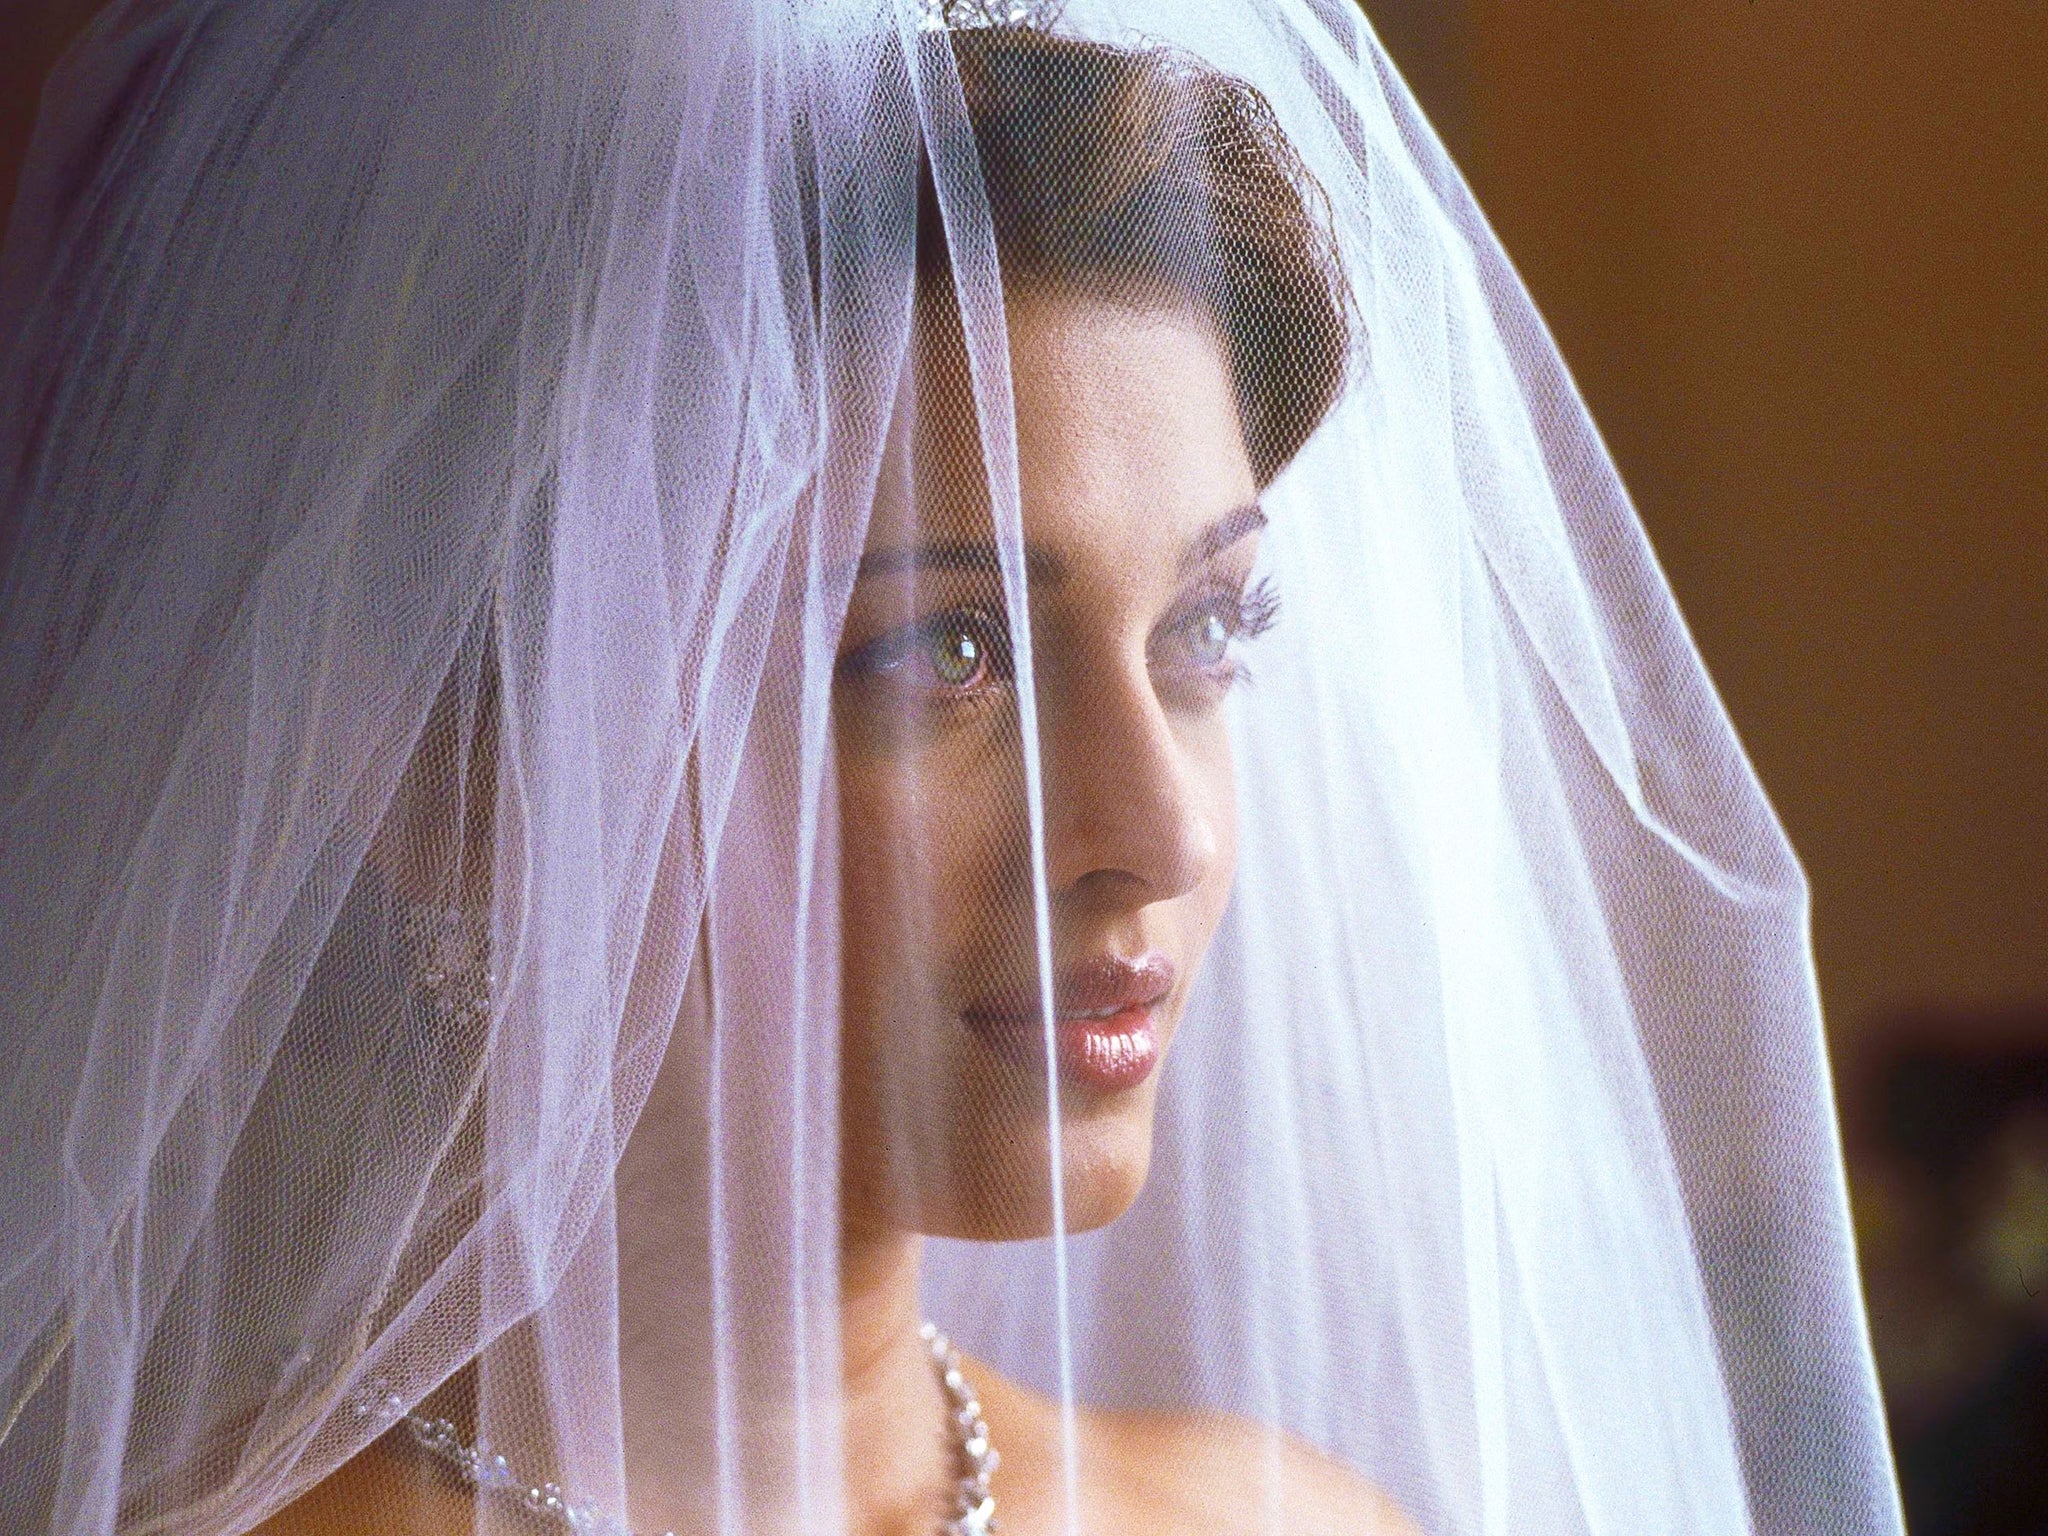 Aishwarya Rai in ‘Bride & Prejudice’. In the UK, brides can pay upwards of £1,000 for the most prestigious make-up artists – or those with the biggest online followings